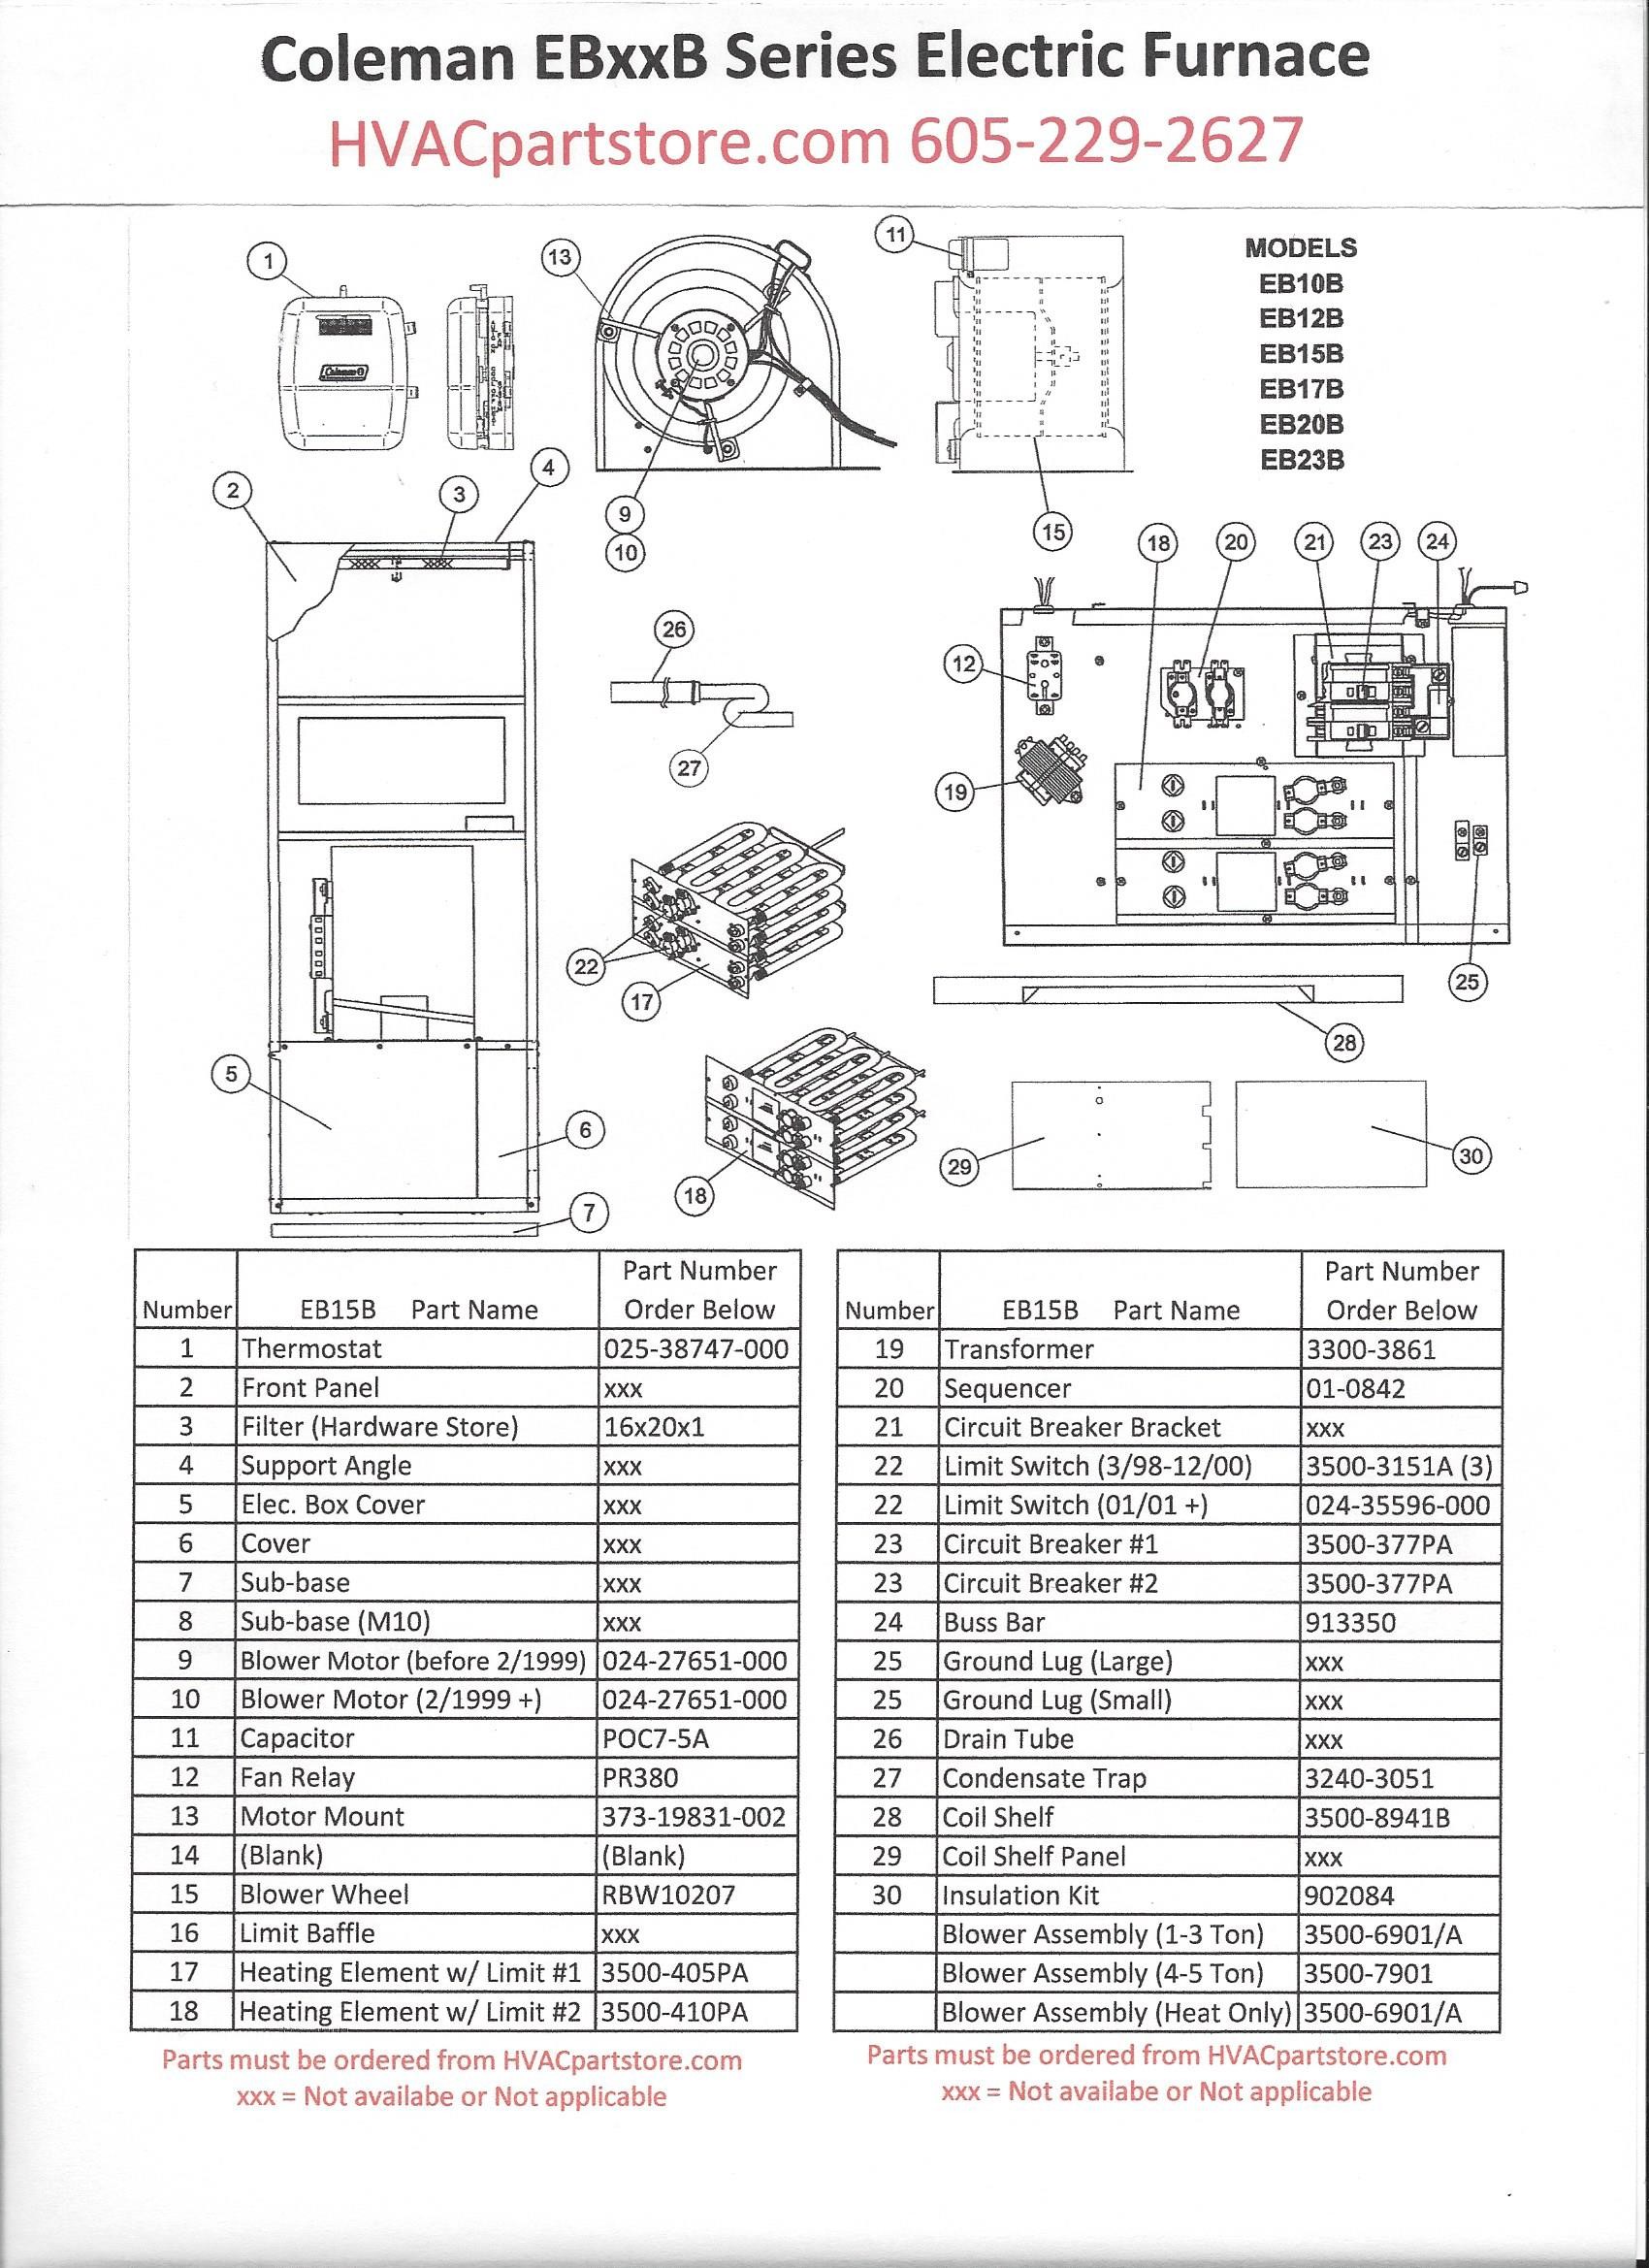 Intertherm 015h Contactor Wiring Diagram Wiring Diagram Ameristar Air Handler Wiring Diagram Intertherm Air Handler Wiring Diagram